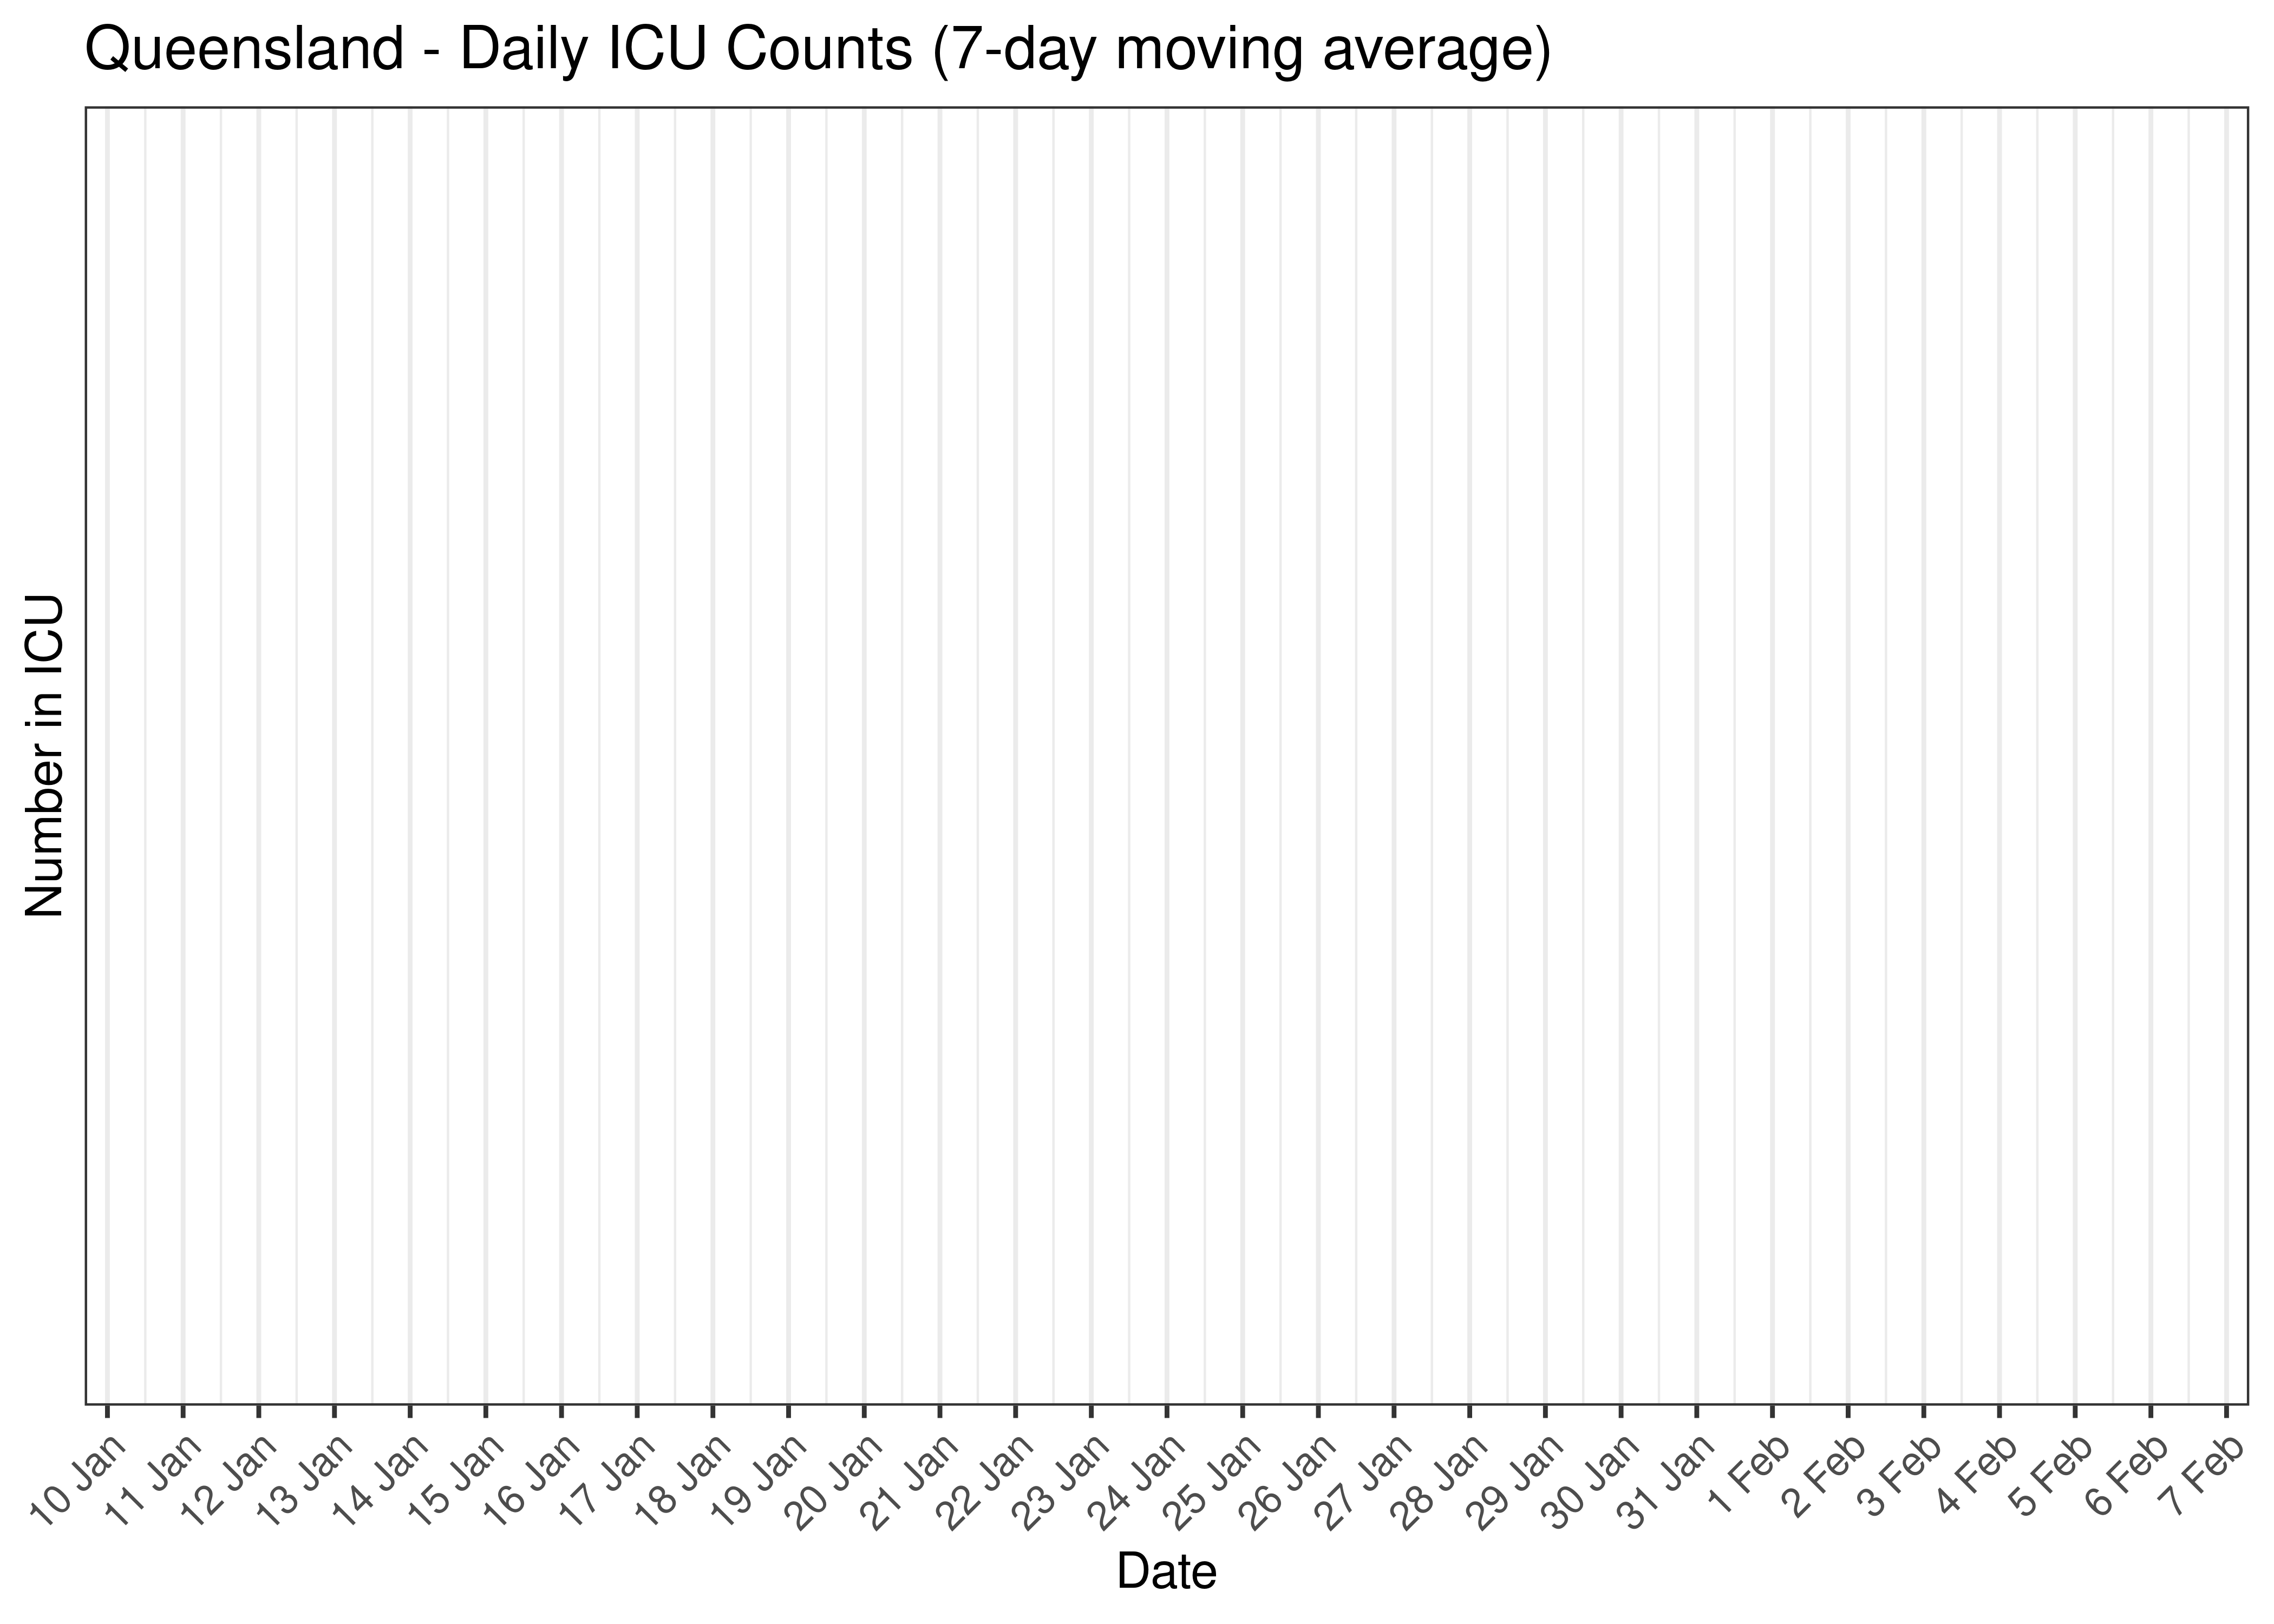 Queensland - Daily ICU Counts for Last 30-days (7-day moving average)